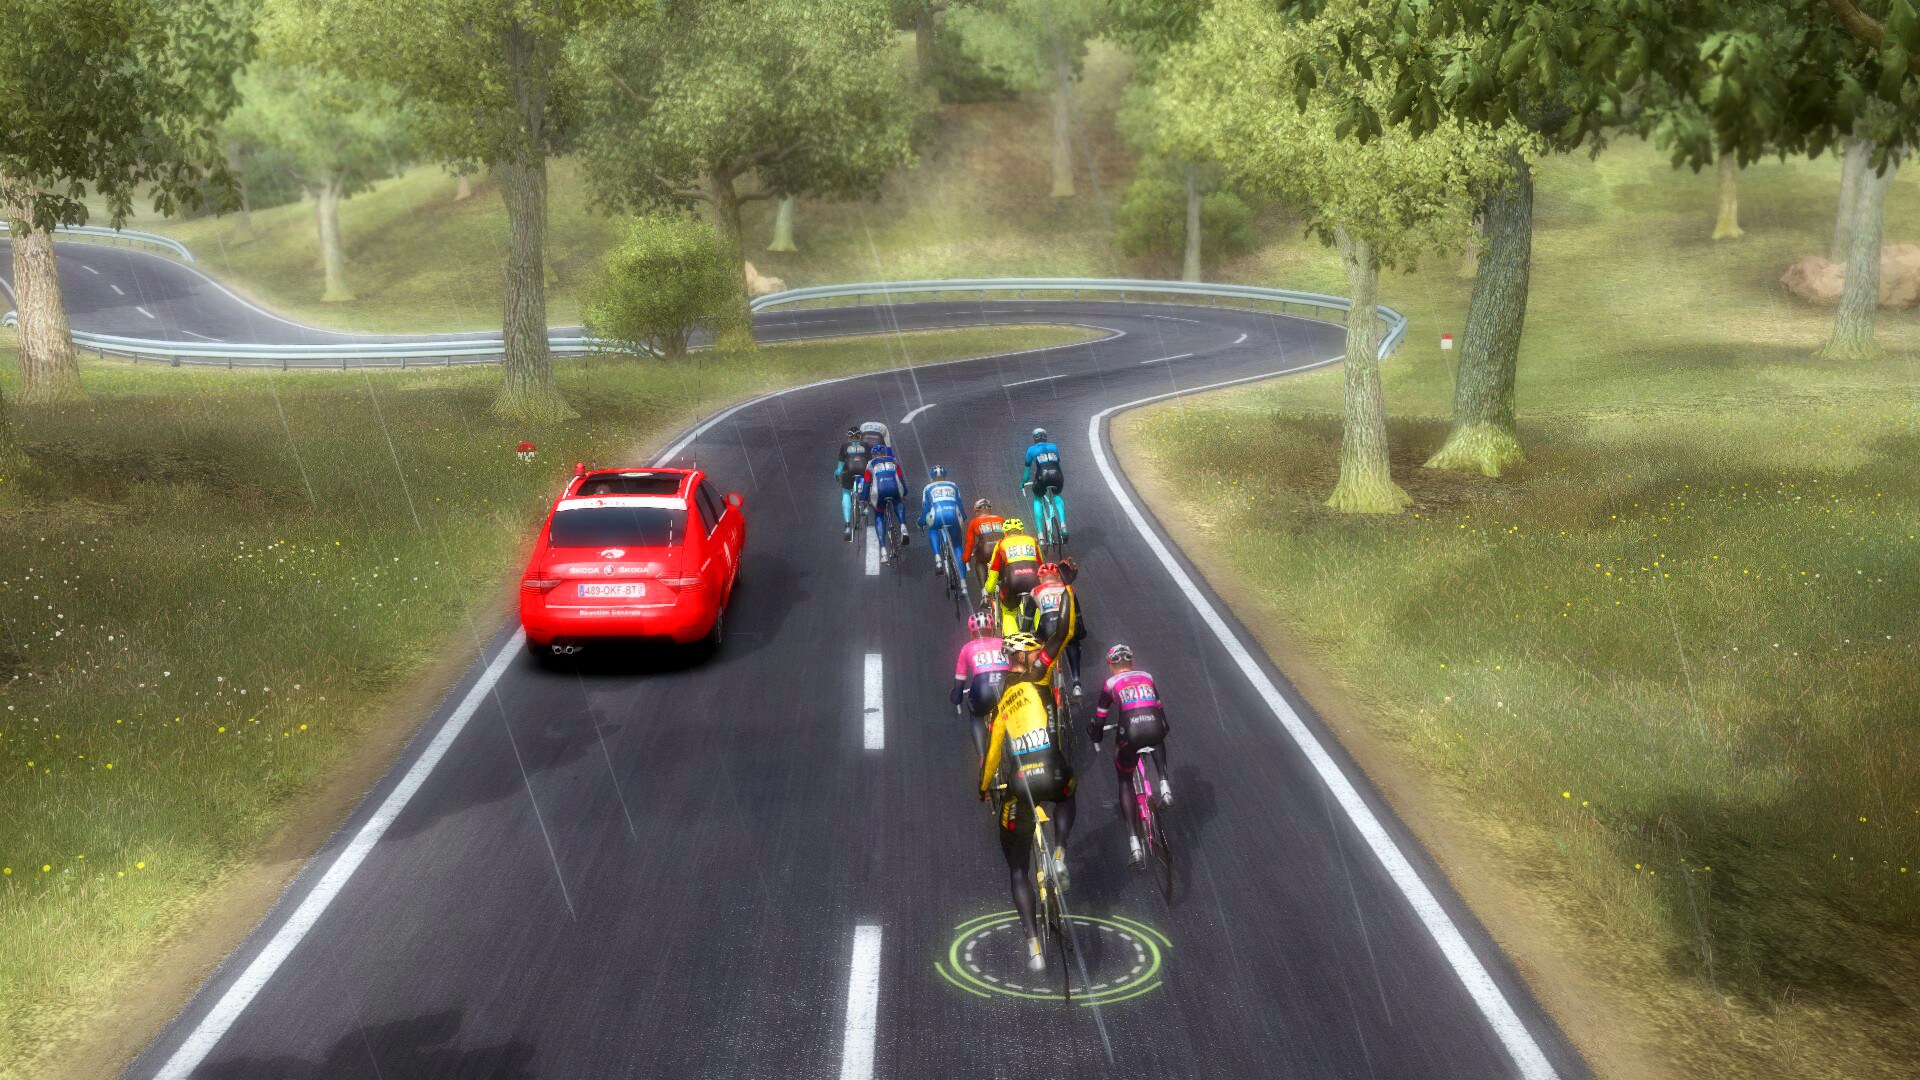 Buy Pro Cycling Manager 2021 (PC) - Steam Gift - GLOBAL - Cheap - G2A.COM!